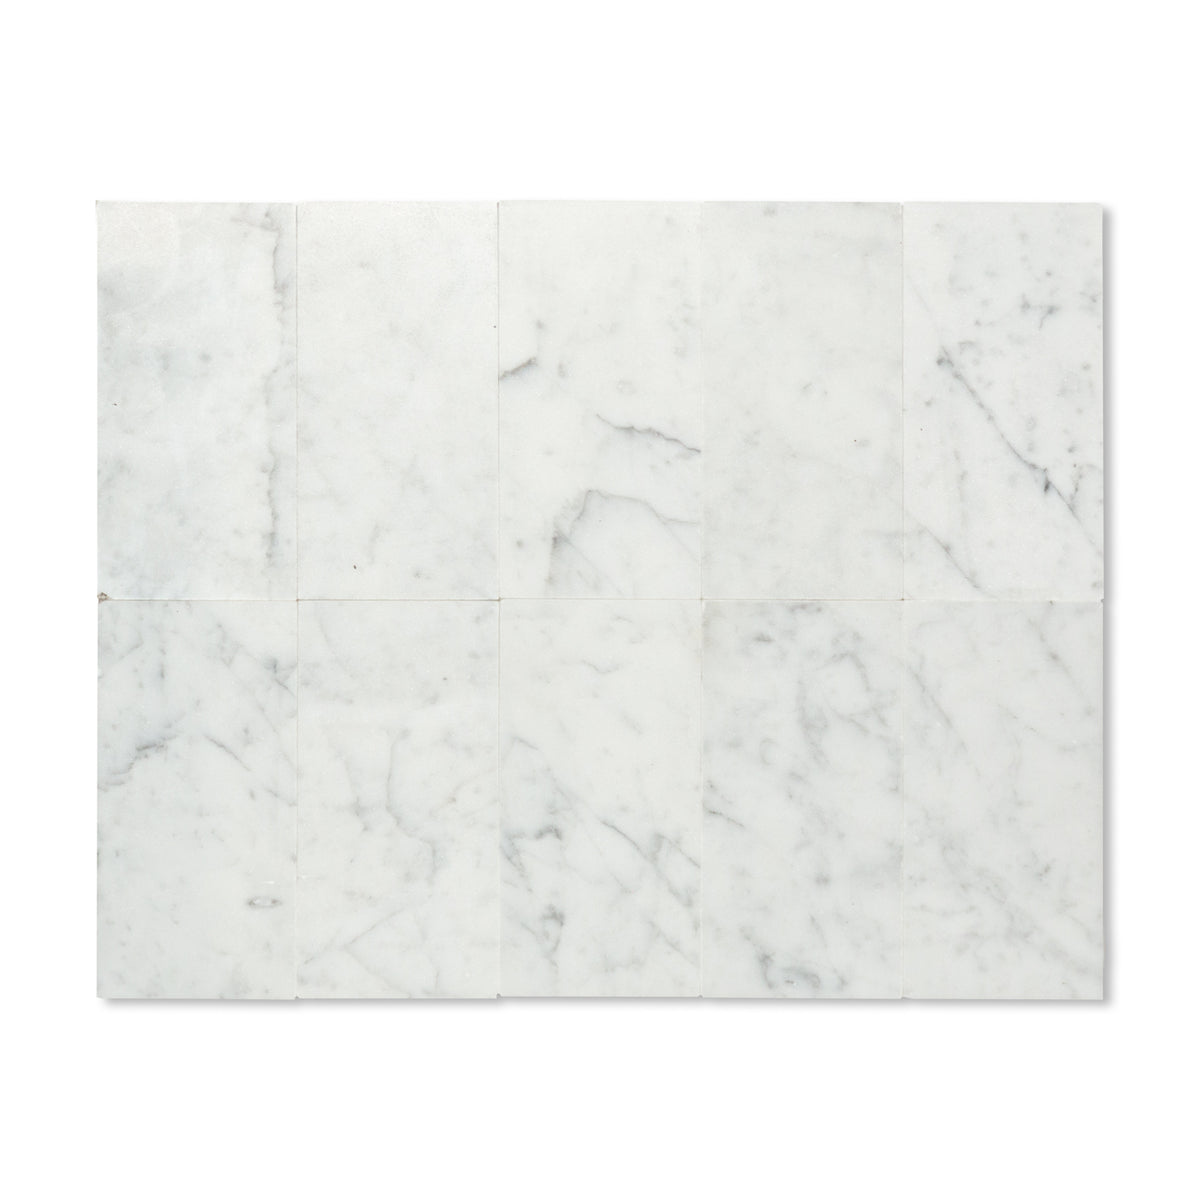 3x6” Carrara Marble Tile in Honed Finish Main Product Slider View